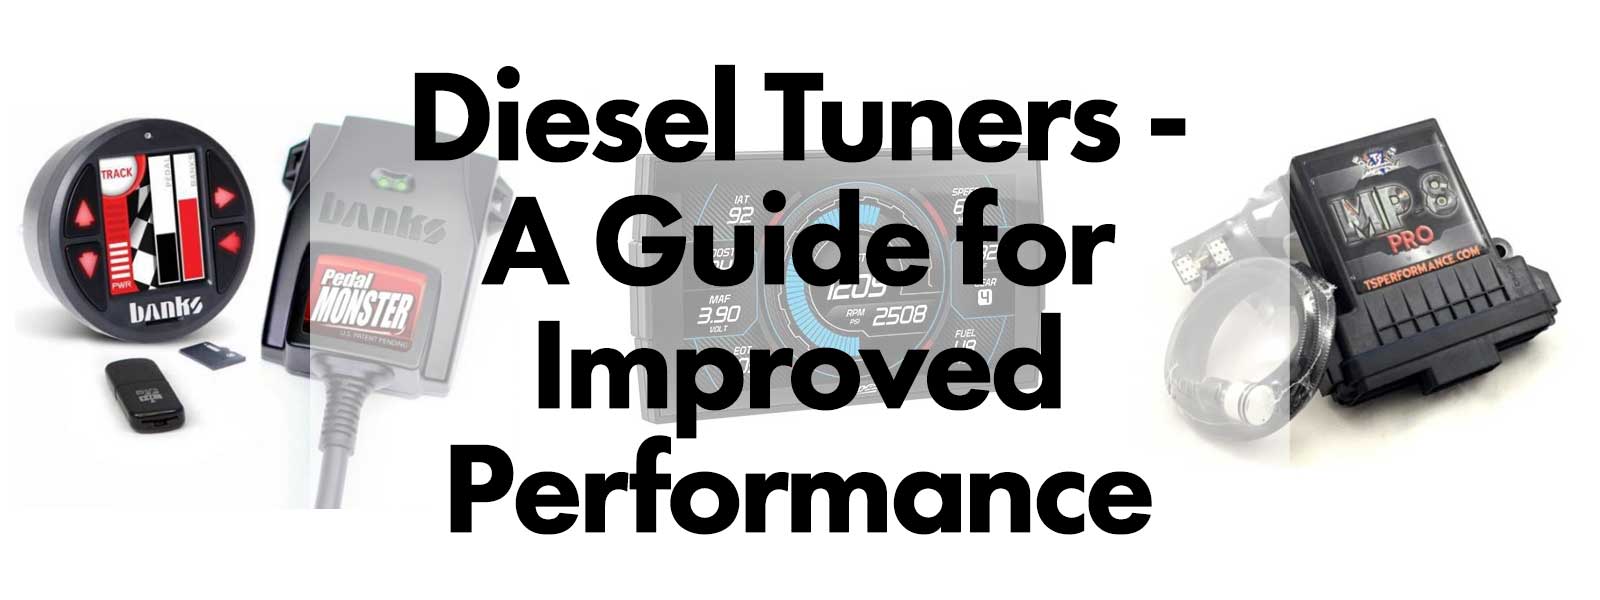 Diesel Tuners - A Guide for Improved Performance